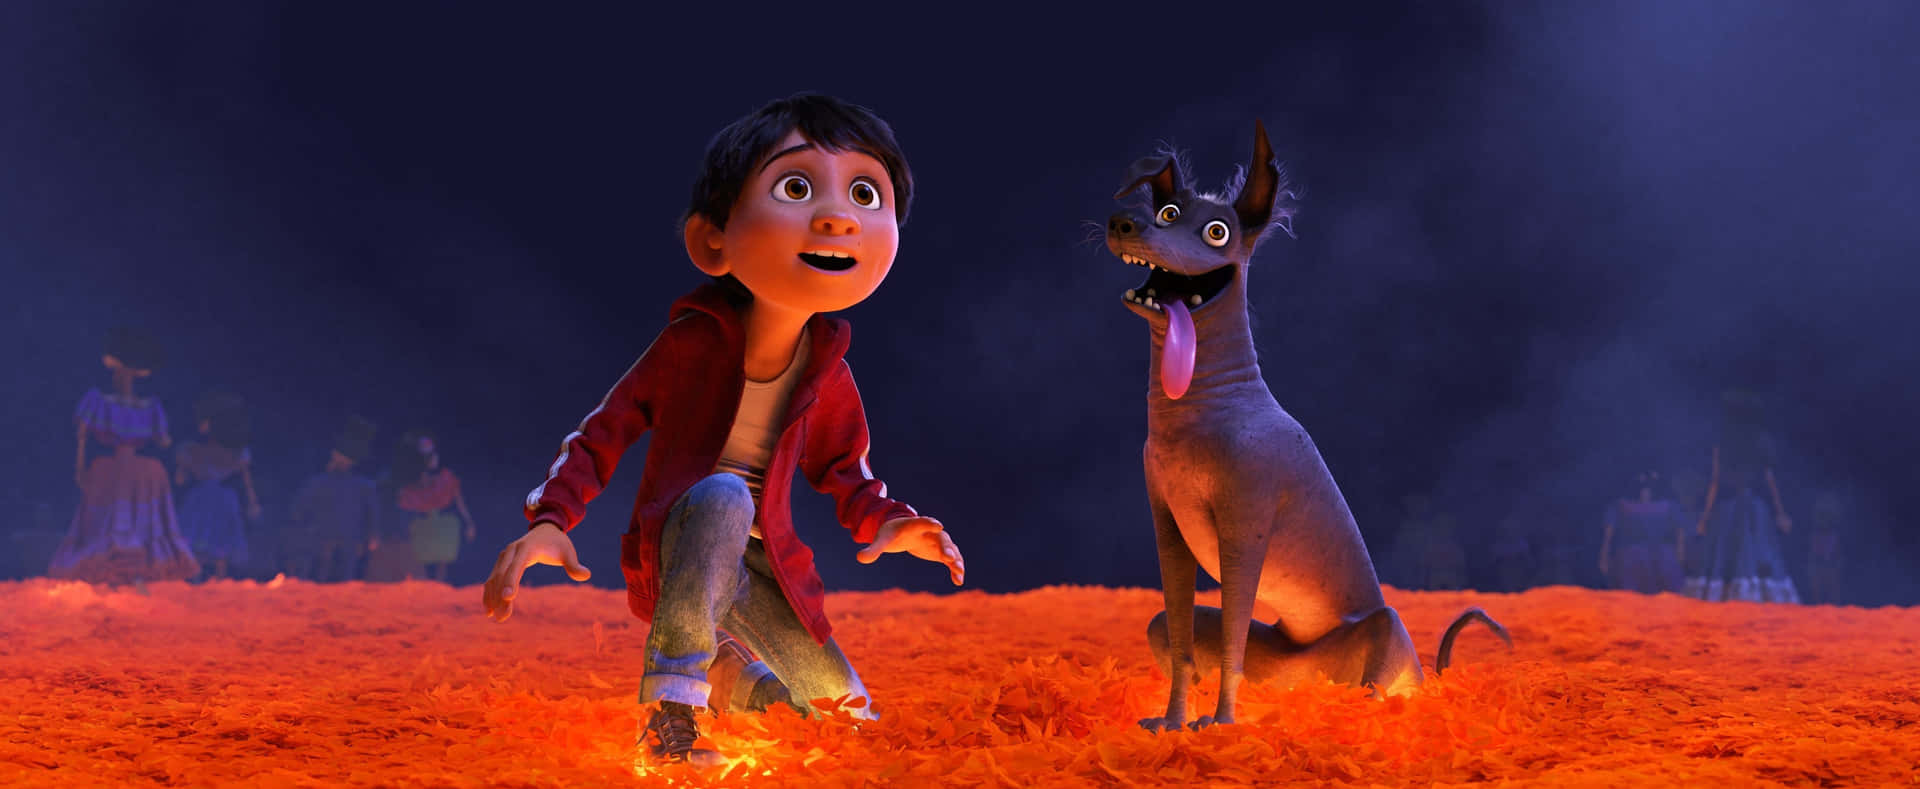 Join Miguel and his friends on this unforgettable adventure in Disney-Pixar's animated movie, Coco. Wallpaper